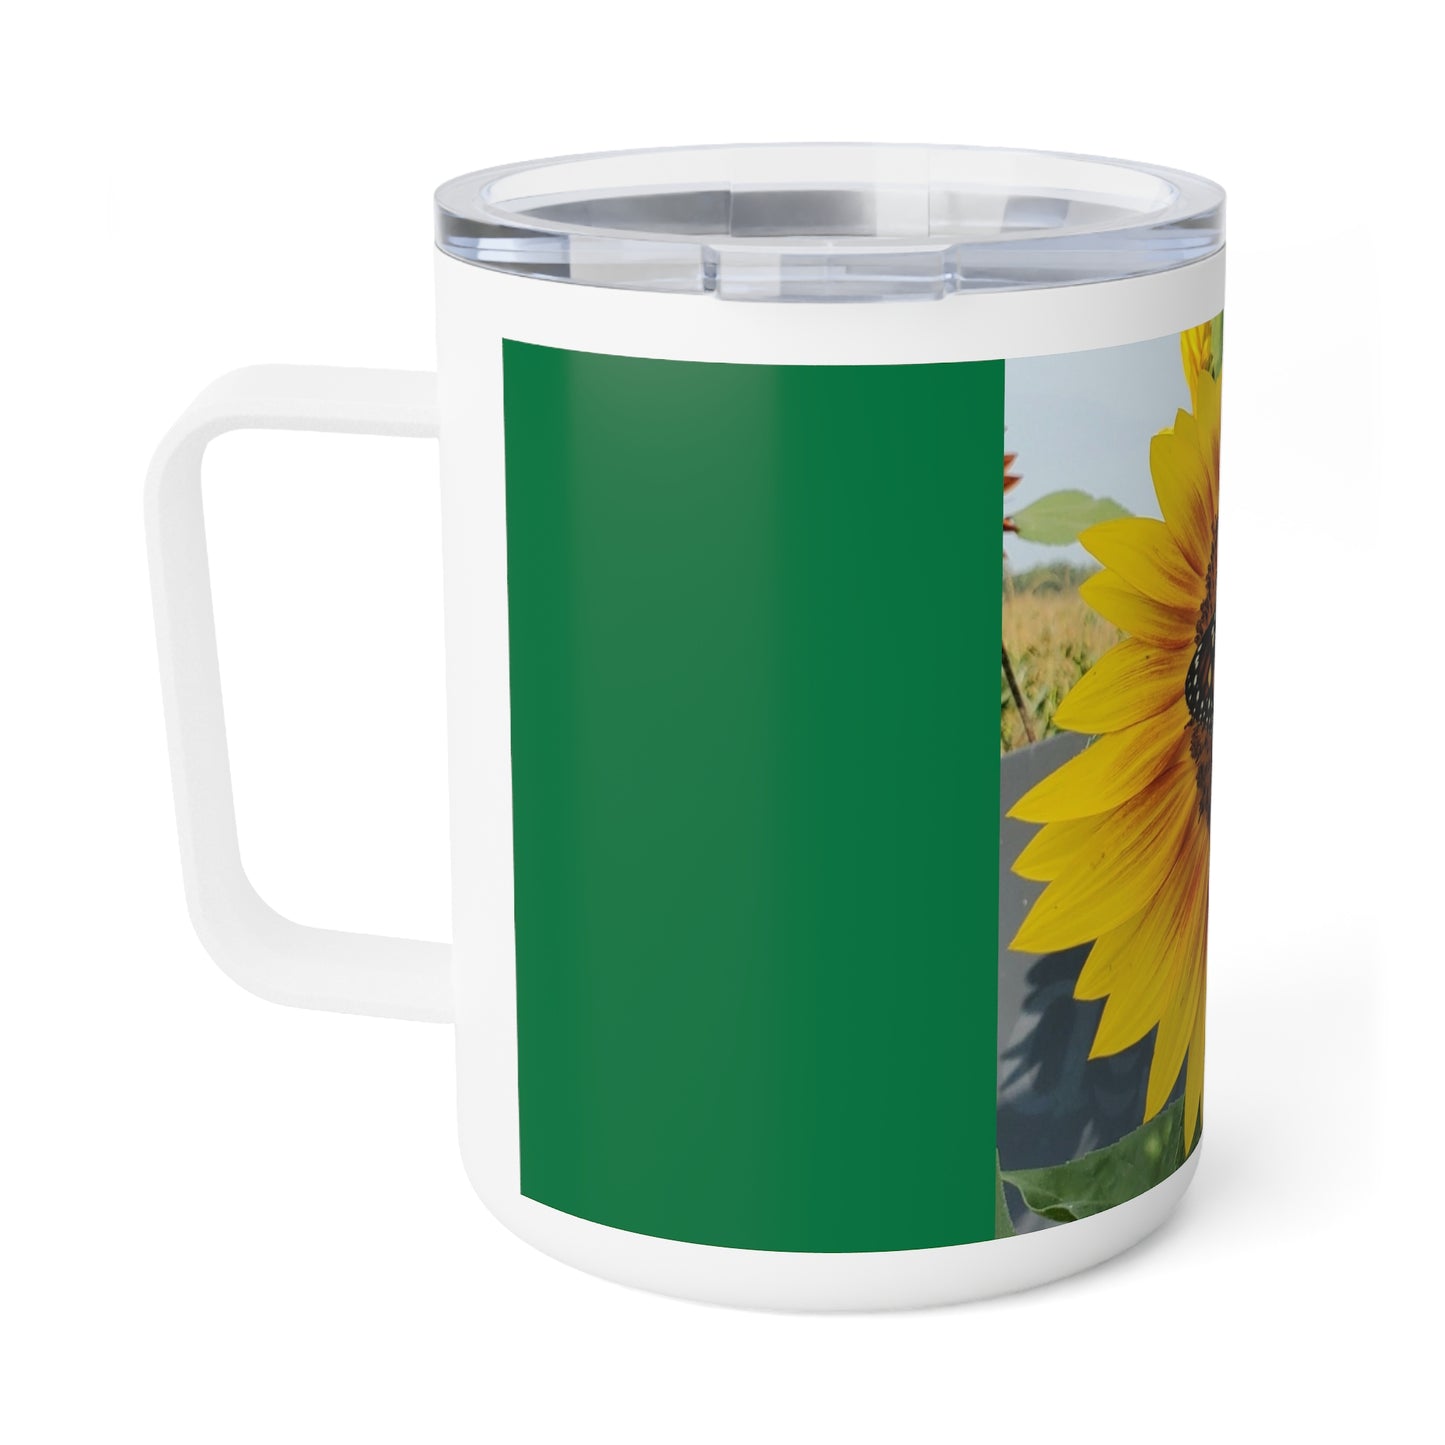 Happy Sunflower Insulated Coffee Mug, 10oz (Enchanted Exposures By Tammy Lyne Collection) GREEN